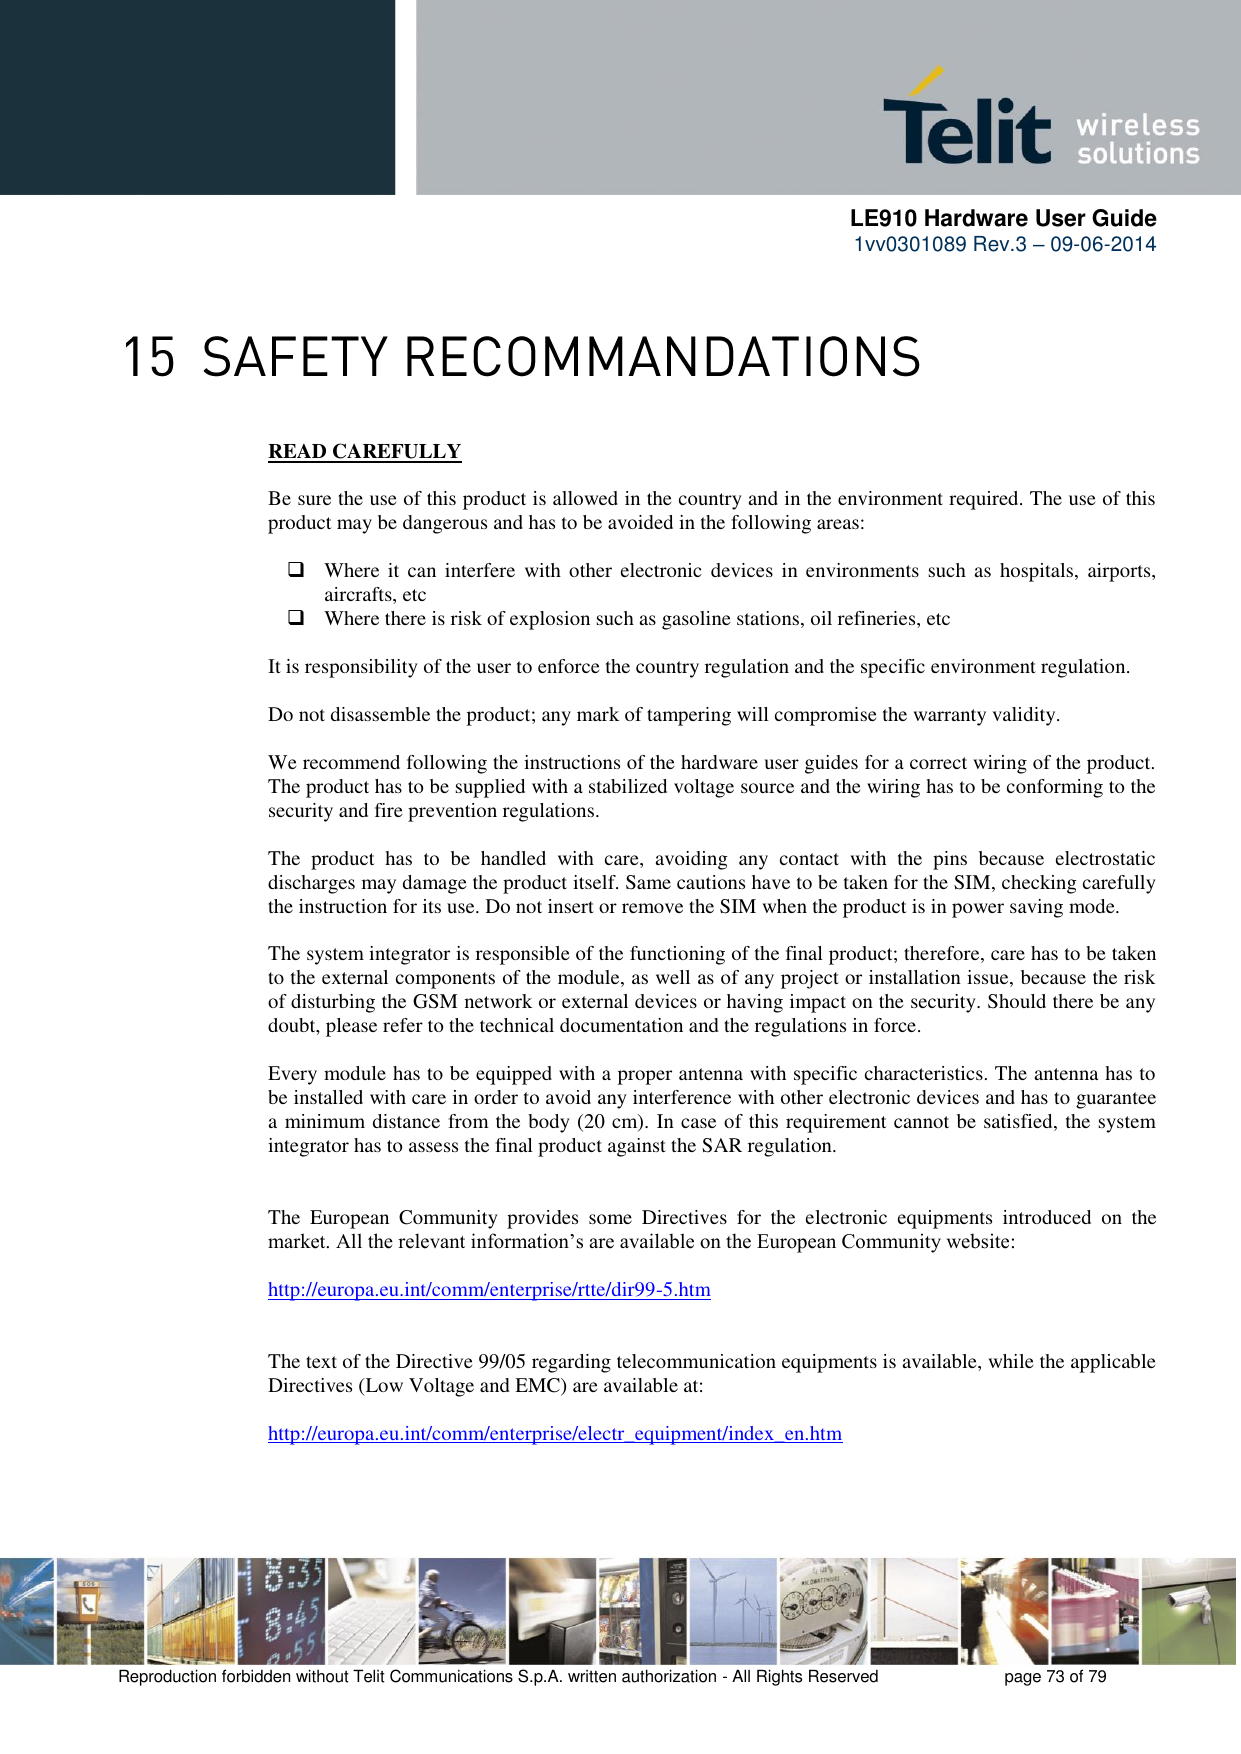      LE910 Hardware User Guide 1vv0301089 Rev.3 – 09-06-2014    Reproduction forbidden without Telit Communications S.p.A. written authorization - All Rights Reserved    page 73 of 79   READ CAREFULLY  Be sure the use of this product is allowed in the country and in the environment required. The use of this product may be dangerous and has to be avoided in the following areas:   Where  it  can  interfere  with other  electronic  devices  in  environments  such  as  hospitals,  airports, aircrafts, etc  Where there is risk of explosion such as gasoline stations, oil refineries, etc   It is responsibility of the user to enforce the country regulation and the specific environment regulation.  Do not disassemble the product; any mark of tampering will compromise the warranty validity.  We recommend following the instructions of the hardware user guides for a correct wiring of the product. The product has to be supplied with a stabilized voltage source and the wiring has to be conforming to the security and fire prevention regulations.  The  product  has  to  be  handled  with  care,  avoiding  any  contact  with  the  pins  because  electrostatic discharges may damage the product itself. Same cautions have to be taken for the SIM, checking carefully the instruction for its use. Do not insert or remove the SIM when the product is in power saving mode.  The system integrator is responsible of the functioning of the final product; therefore, care has to be taken to the external components of the module, as well as of any project or installation issue, because the risk of disturbing the GSM network or external devices or having impact on the security. Should there be any doubt, please refer to the technical documentation and the regulations in force.  Every module has to be equipped with a proper antenna with specific characteristics. The antenna has to be installed with care in order to avoid any interference with other electronic devices and has to guarantee a minimum distance from the body (20 cm). In case of this requirement cannot be satisfied, the system integrator has to assess the final product against the SAR regulation.   The  European  Community  provides  some  Directives  for  the  electronic  equipments  introduced  on  the market. All the relevant information’s are available on the European Community website:  http://europa.eu.int/comm/enterprise/rtte/dir99-5.htm     The text of the Directive 99/05 regarding telecommunication equipments is available, while the applicable Directives (Low Voltage and EMC) are available at:  http://europa.eu.int/comm/enterprise/electr_equipment/index_en.htm    